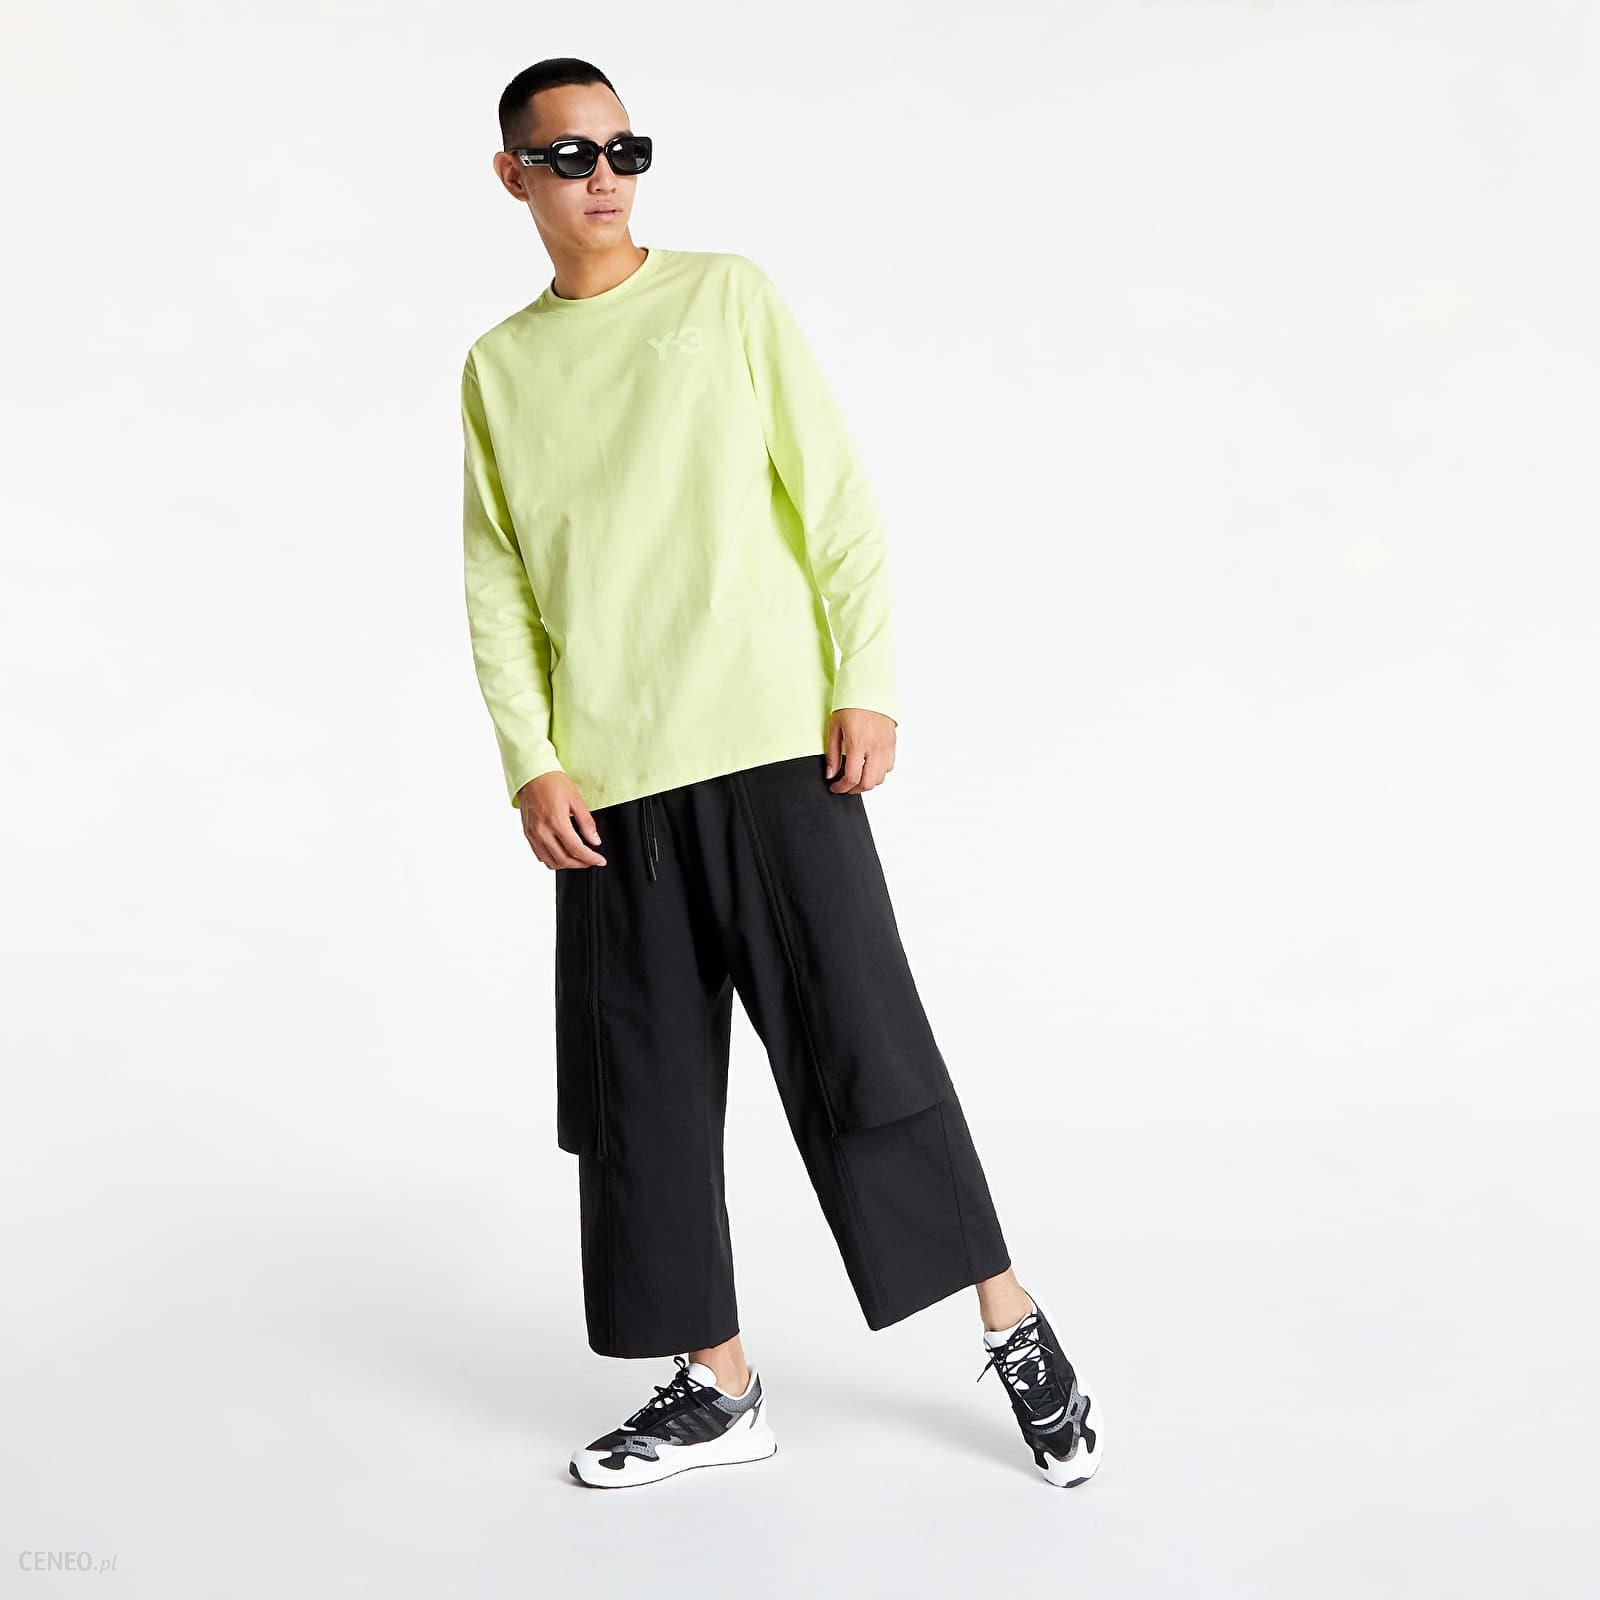 Y-3 M Classic Chest Logo Ls Tee Semi Frozen Yellow - Ceny i opinie